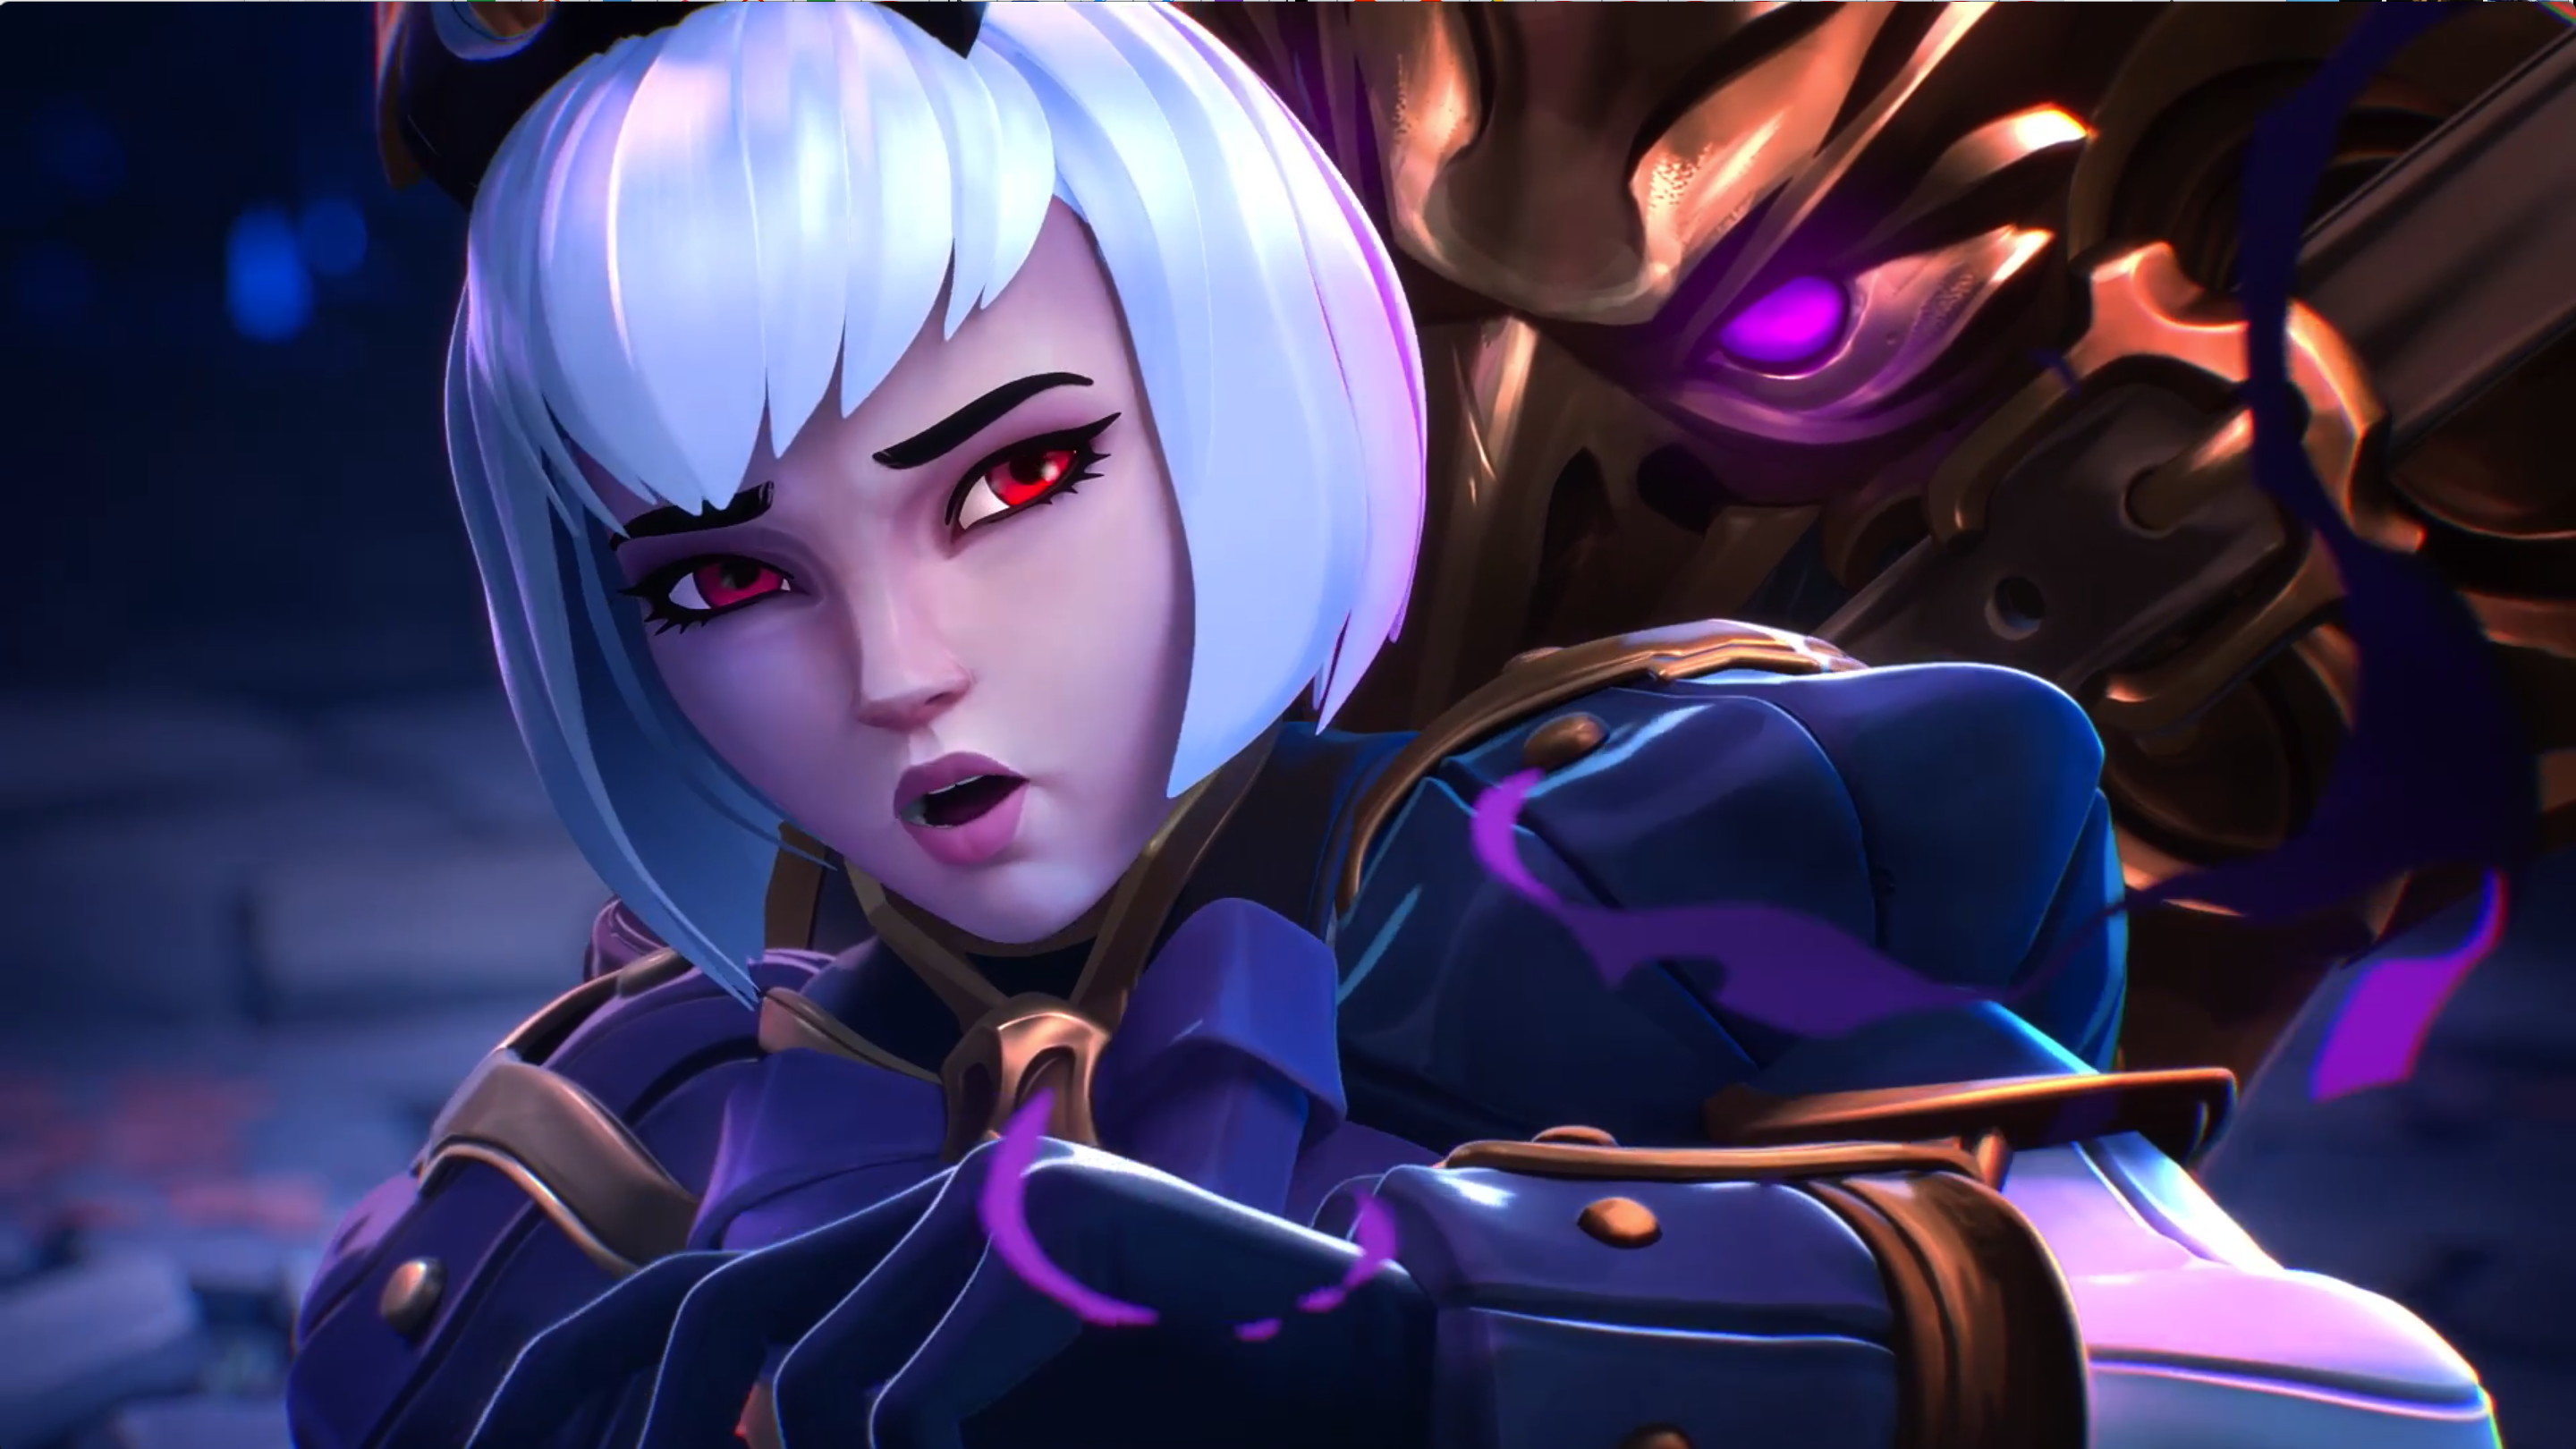 New, Totally Original Heroes of the Storm Character Announced